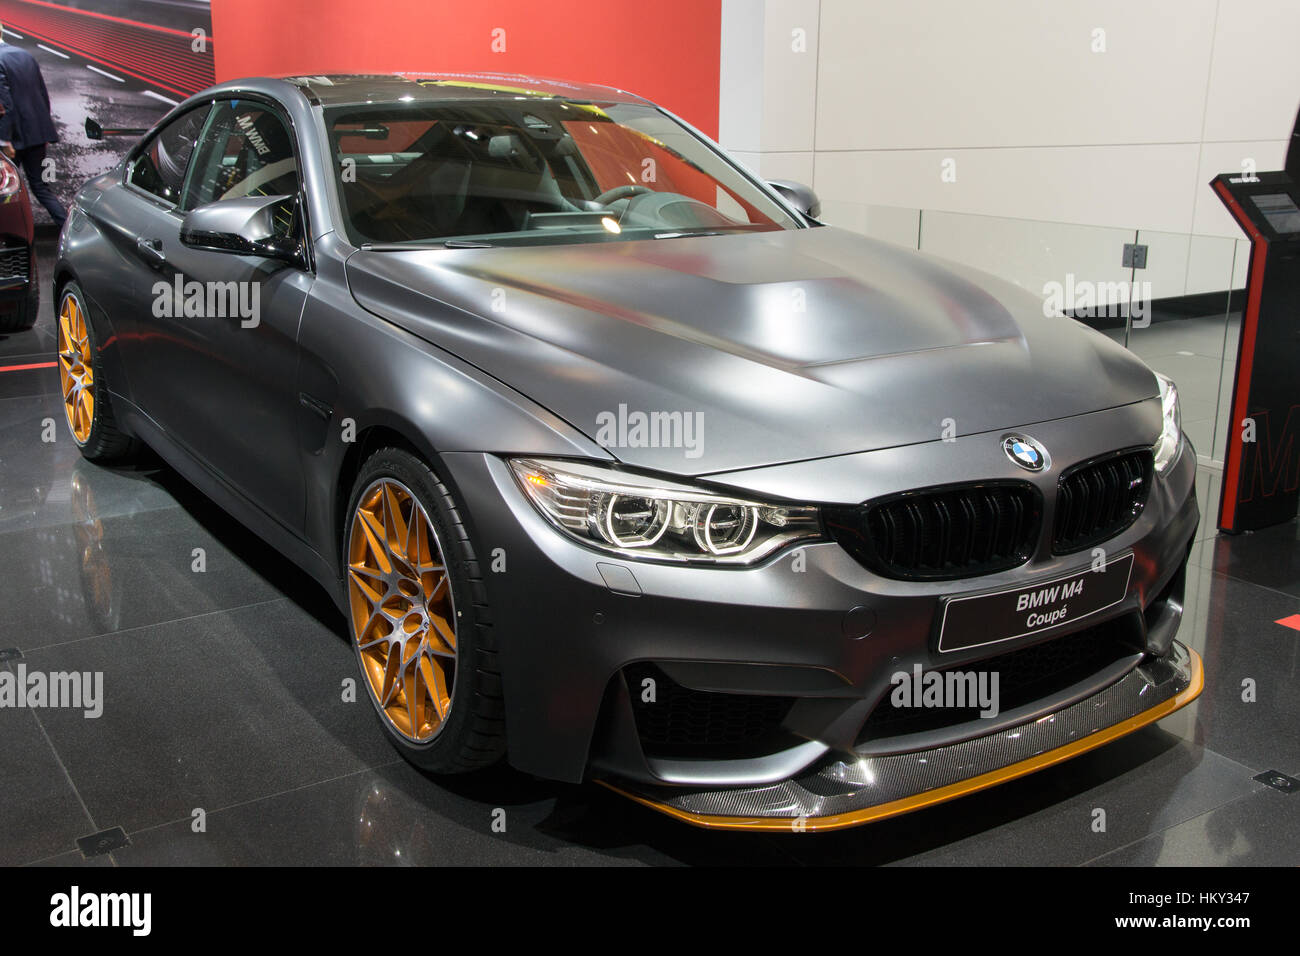 BRUSSELS - JAN 12, 2016: BMW M4 GTS Coupe shown at the Brussels Motor Show. Stock Photo